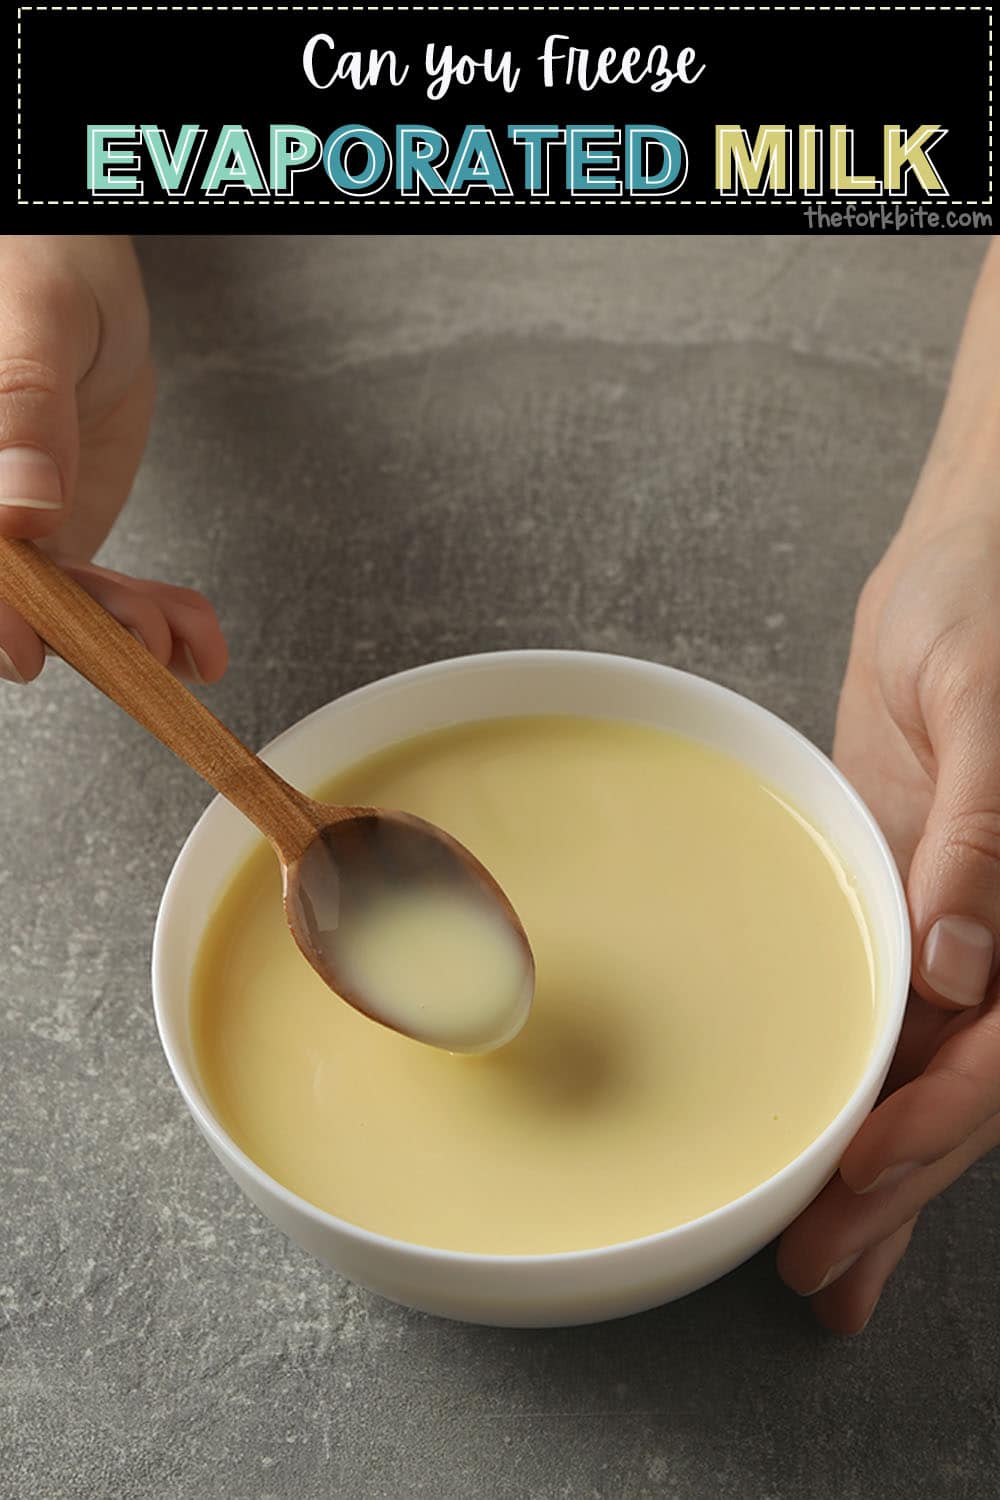 Freezing evaporated milk is a simple process that will only take you a few minutes at the most. The important thing is to know which recipes you will be using your frozen evap in.